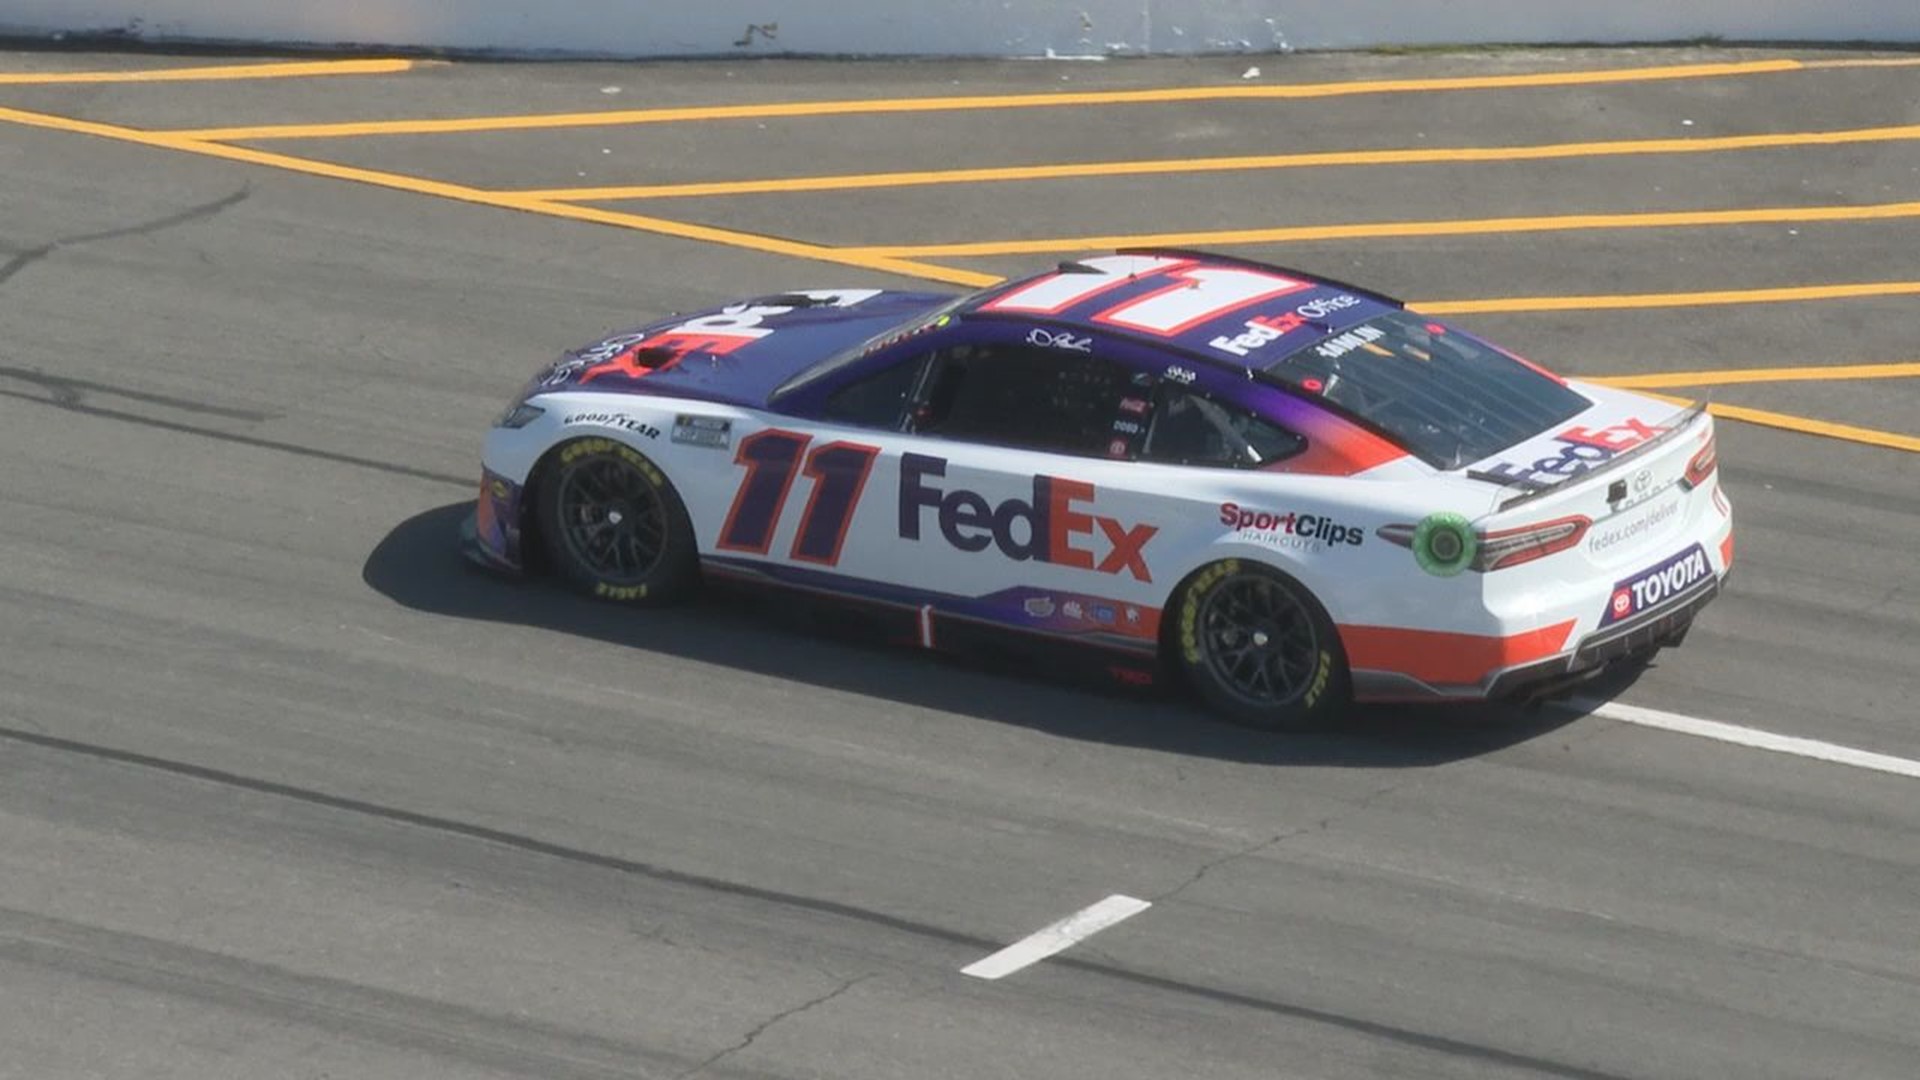 Hamlin wins pole as he looks to win a record 7th race at the Tricky Triangle